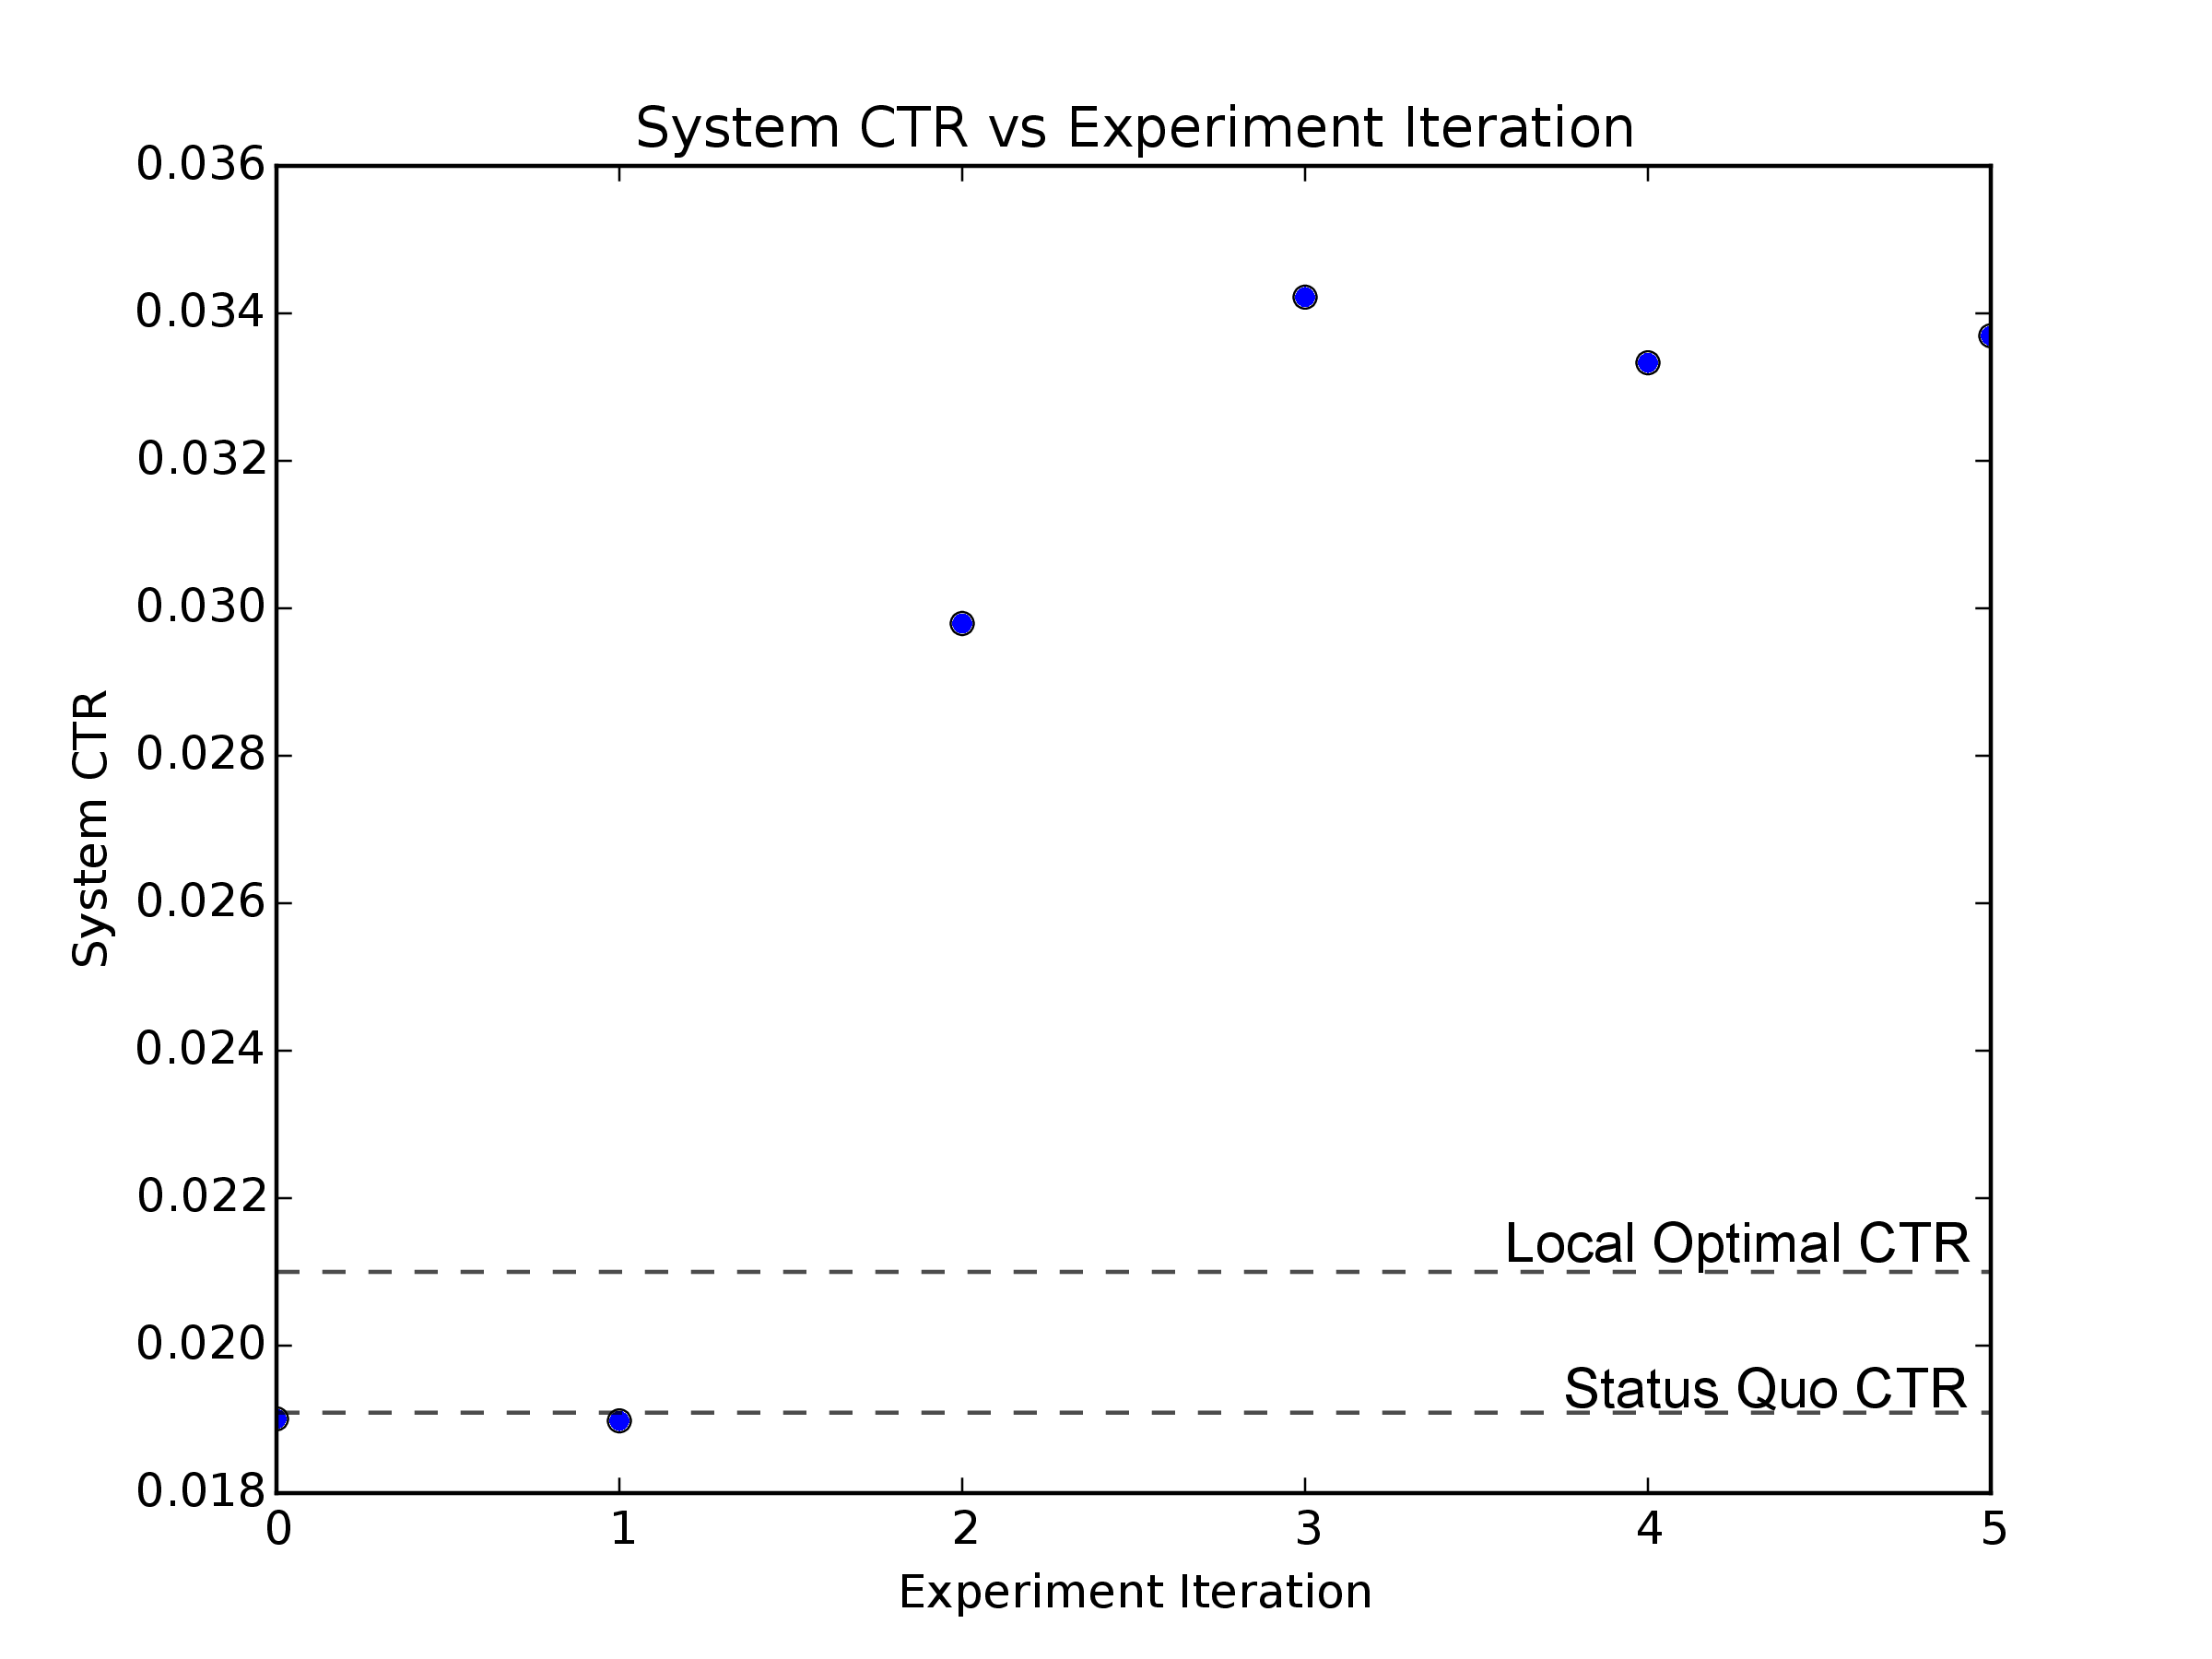 Figure 5: The simulated CTR during for each round of sampled parameter values. Initially the system CTR is equal to the status quo CTR. MOE quickly finds better and better values of the underlying parameter, converging to the global optima in 3 short sets of samples.